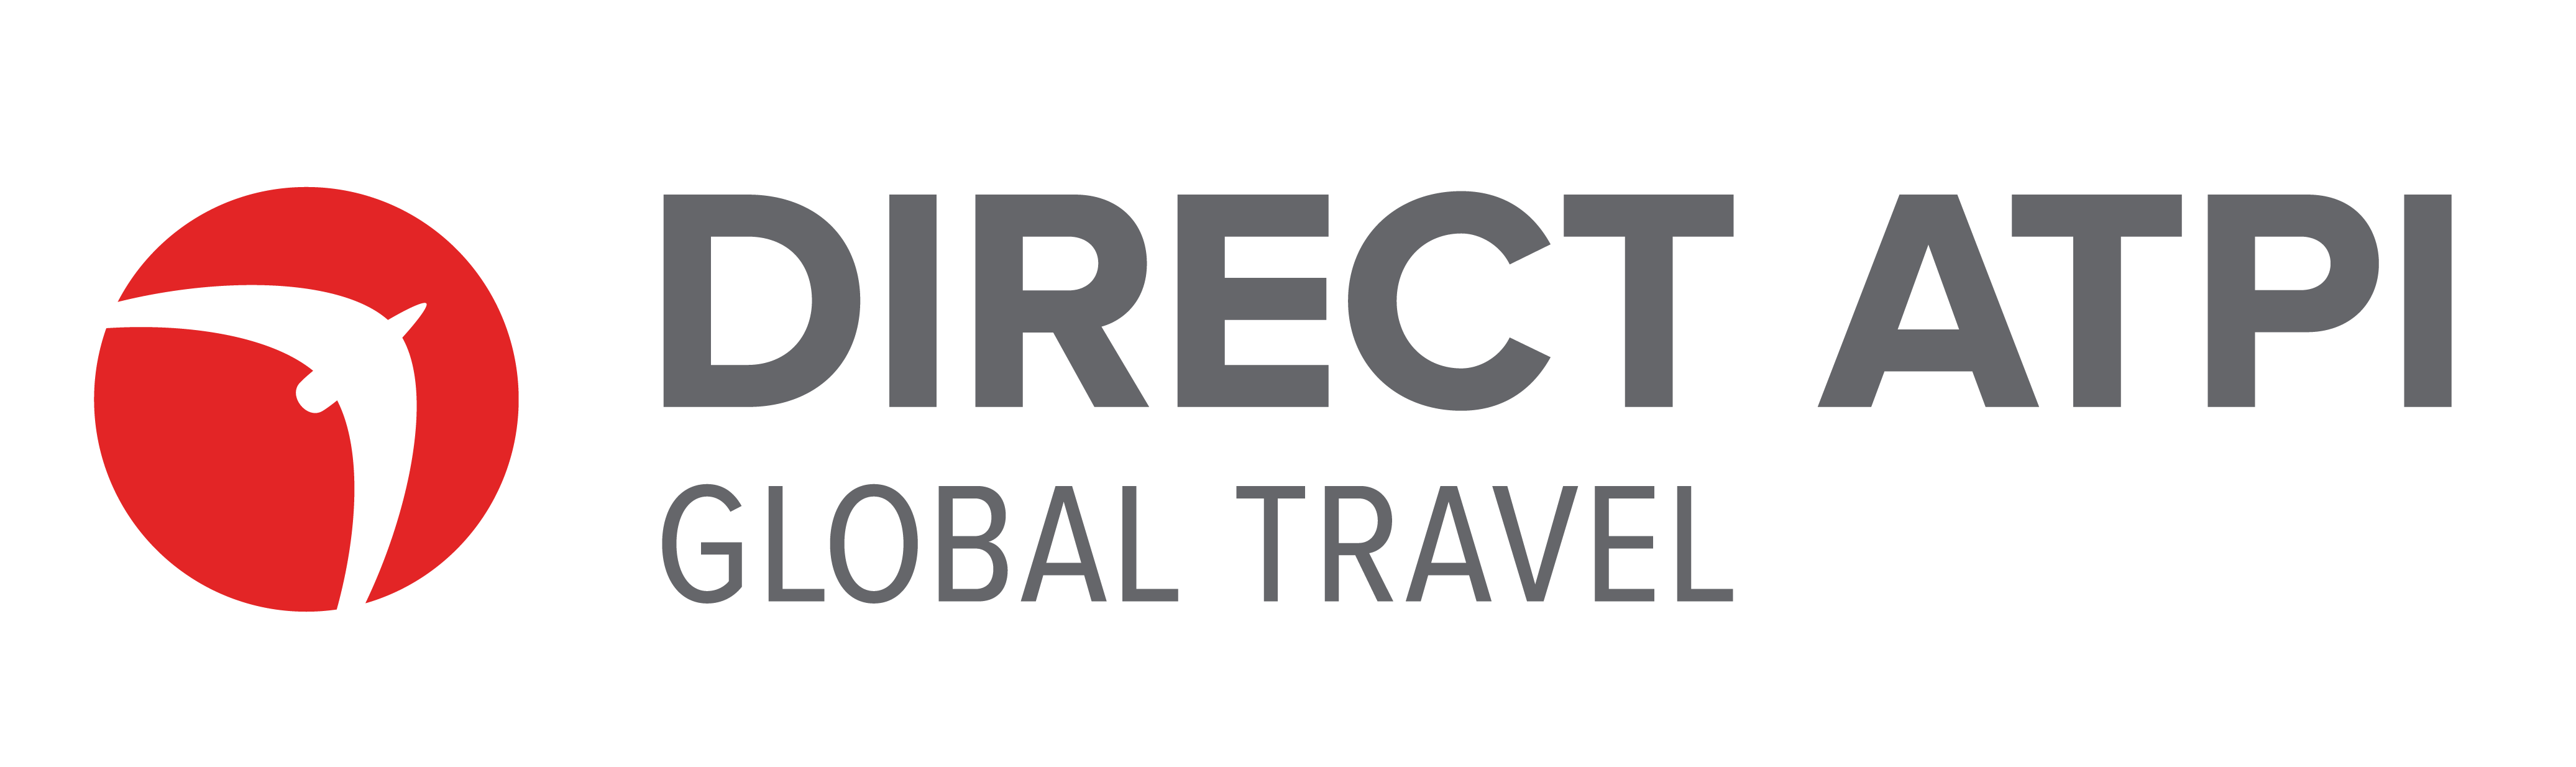 direct travel founded